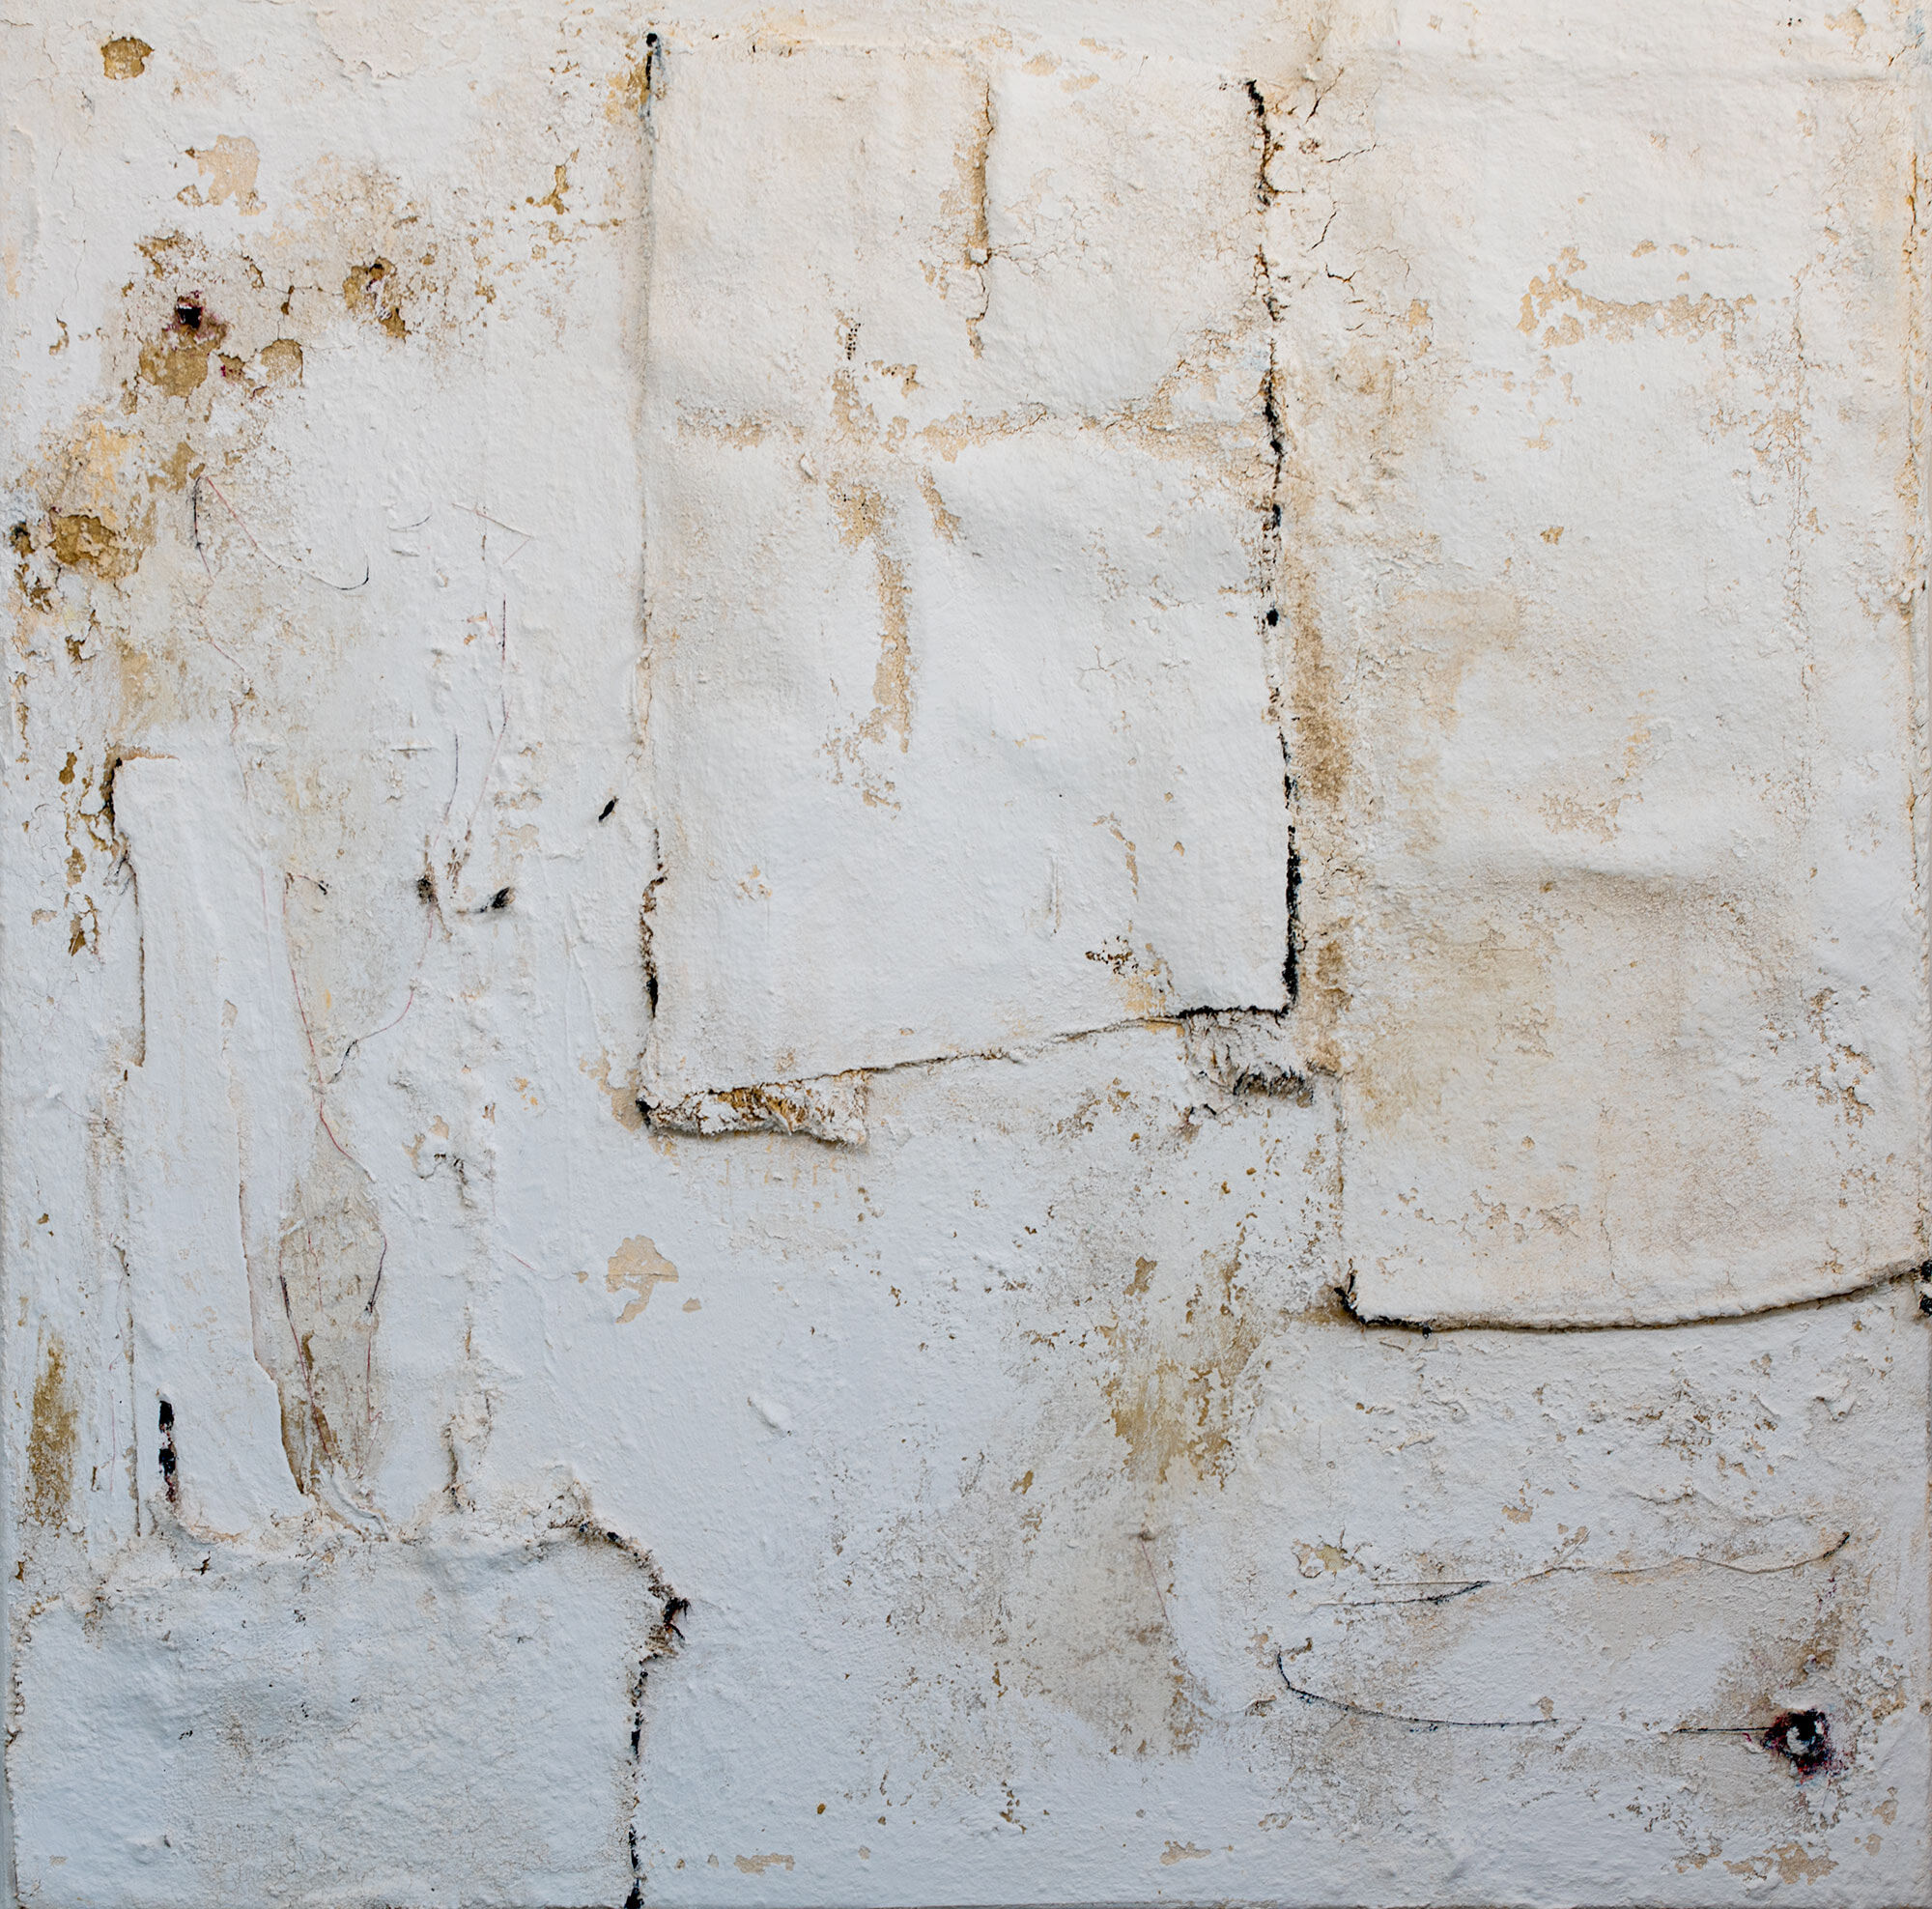 Anna-Caione-White-#83,-2018,-fabric,-pigment-&-mixed-media-on-canvas,-100cmx100cm